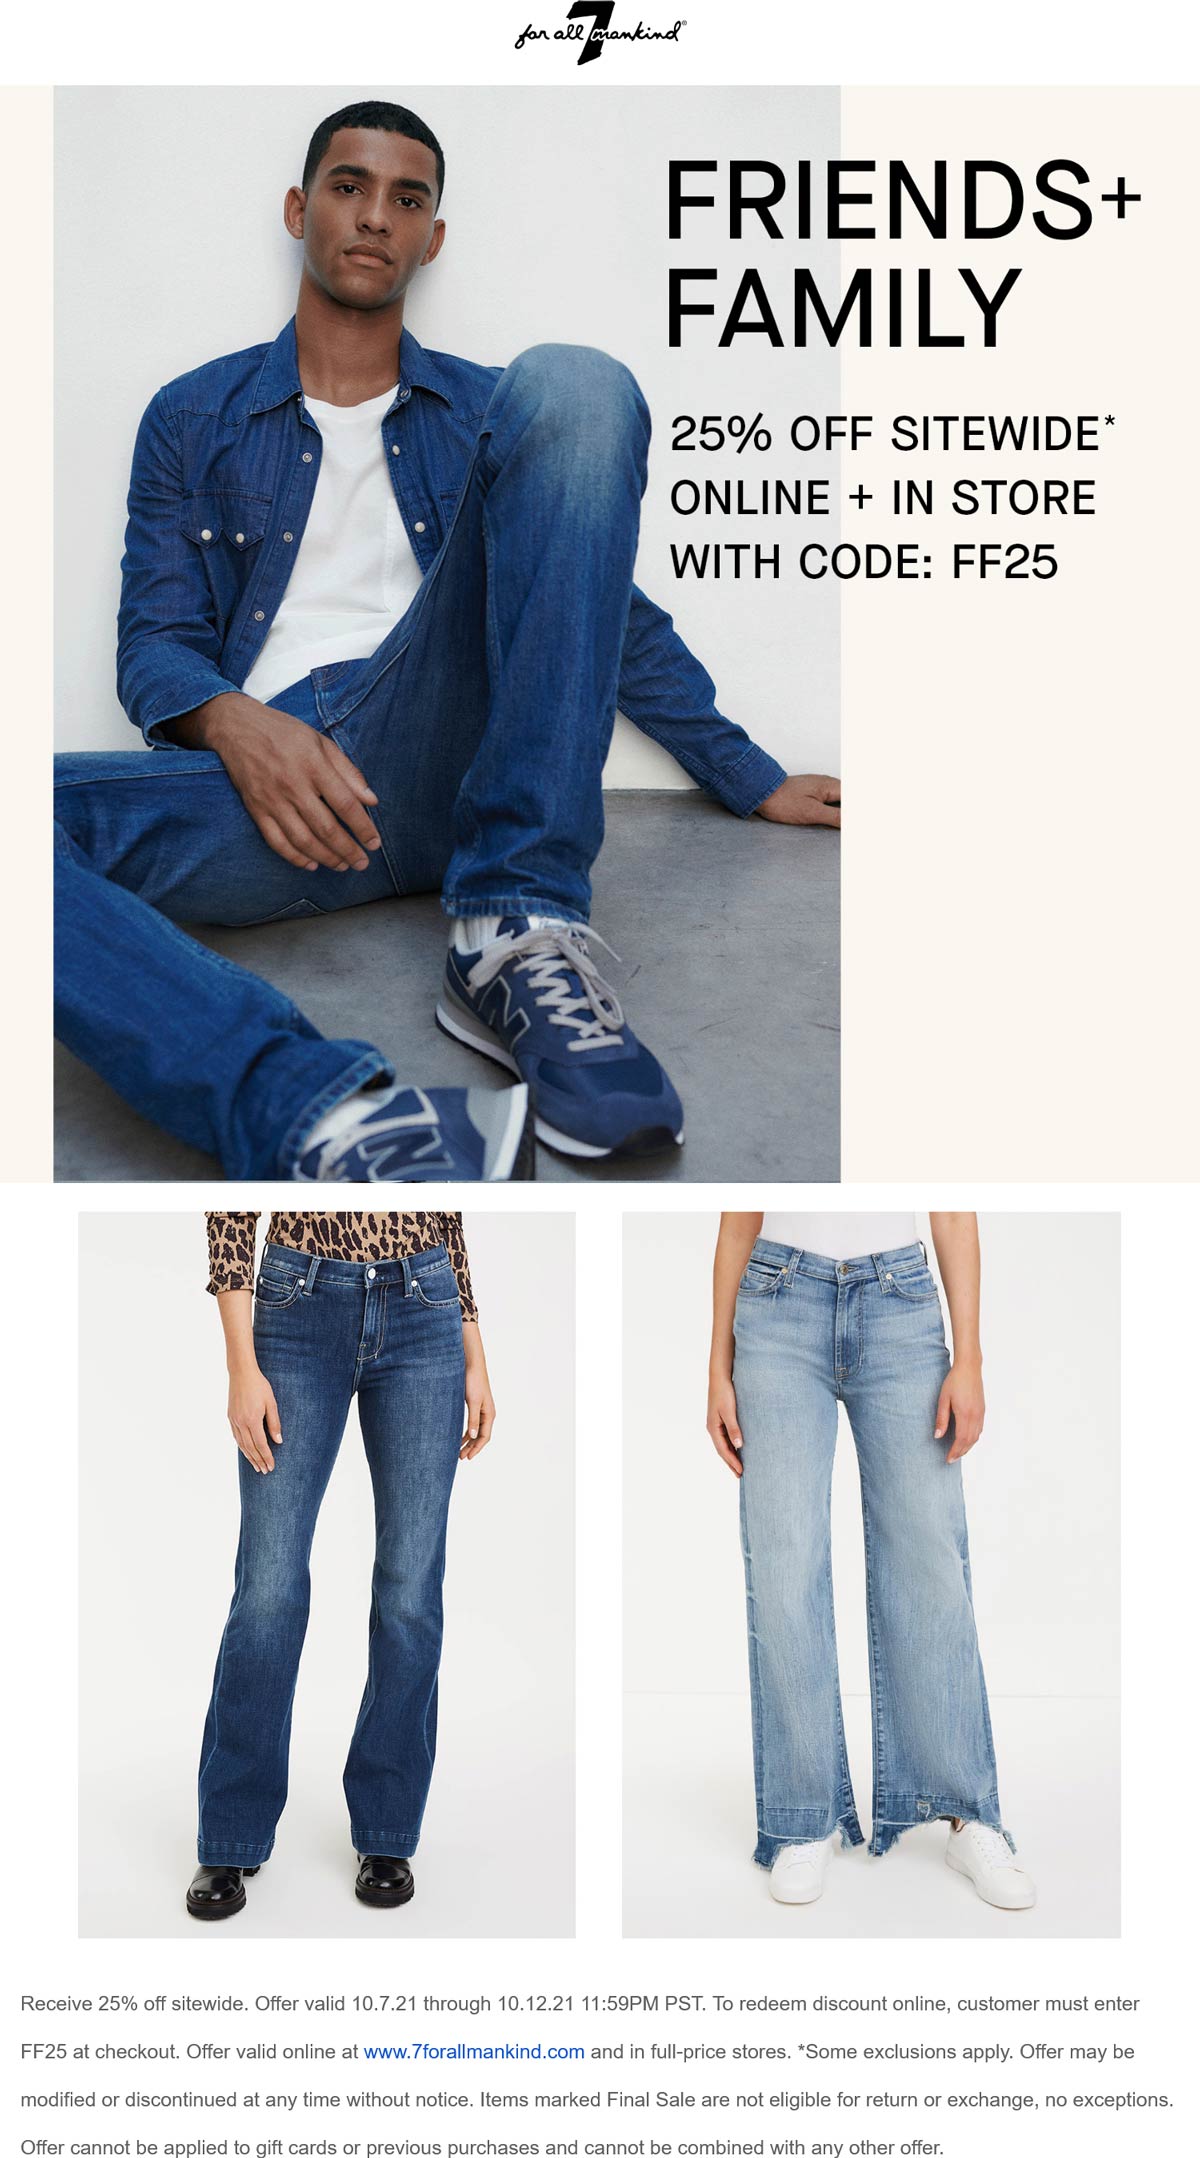 7 for all Mankind stores Coupon  25% off everything online at 7 for all Mankind via promo code FF25 #7forallmankind 